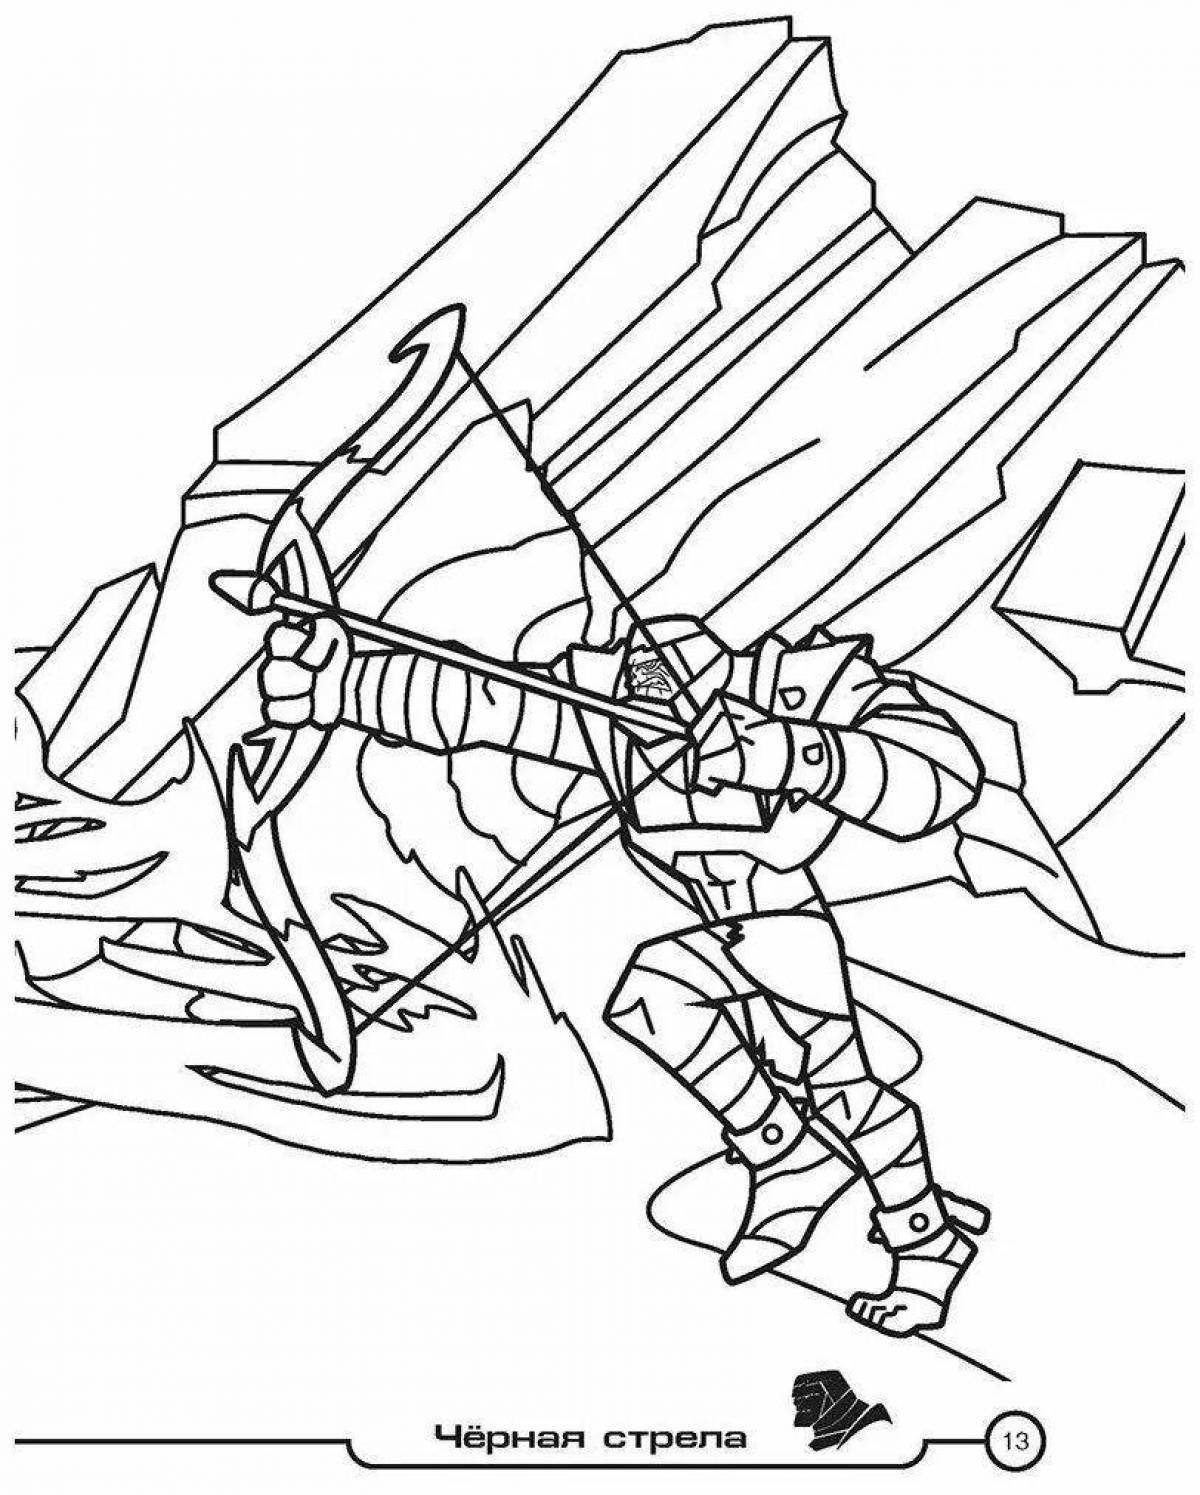 Sublime coloring page of egyptus